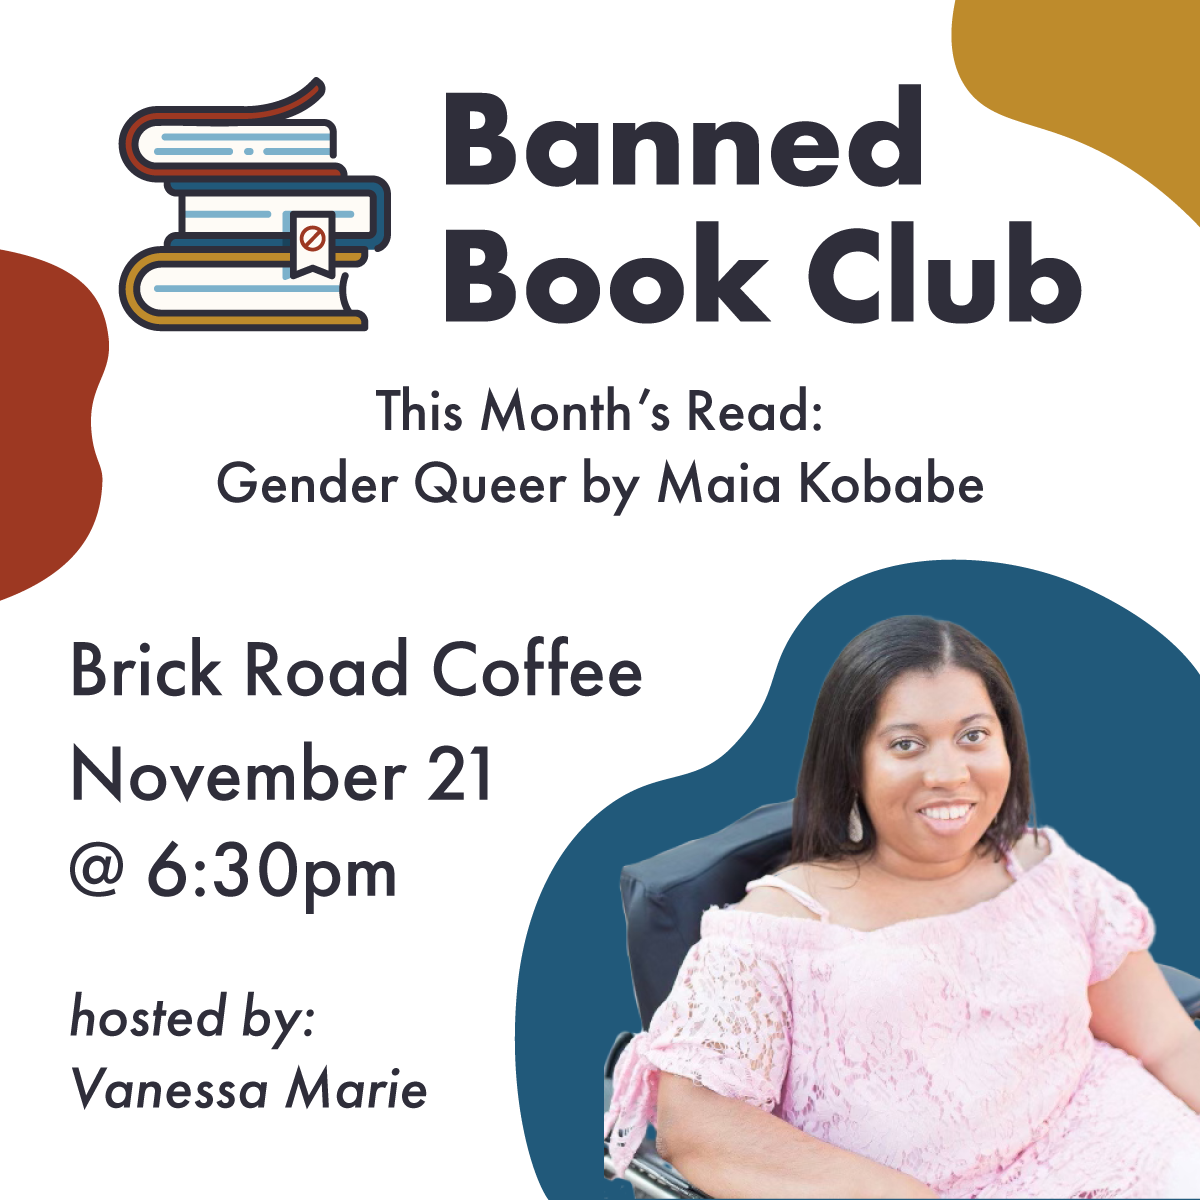 Banned Book Club. This month's read: Gender Queer. Brick Road Coffee, November 21 @ 6:30 PM.